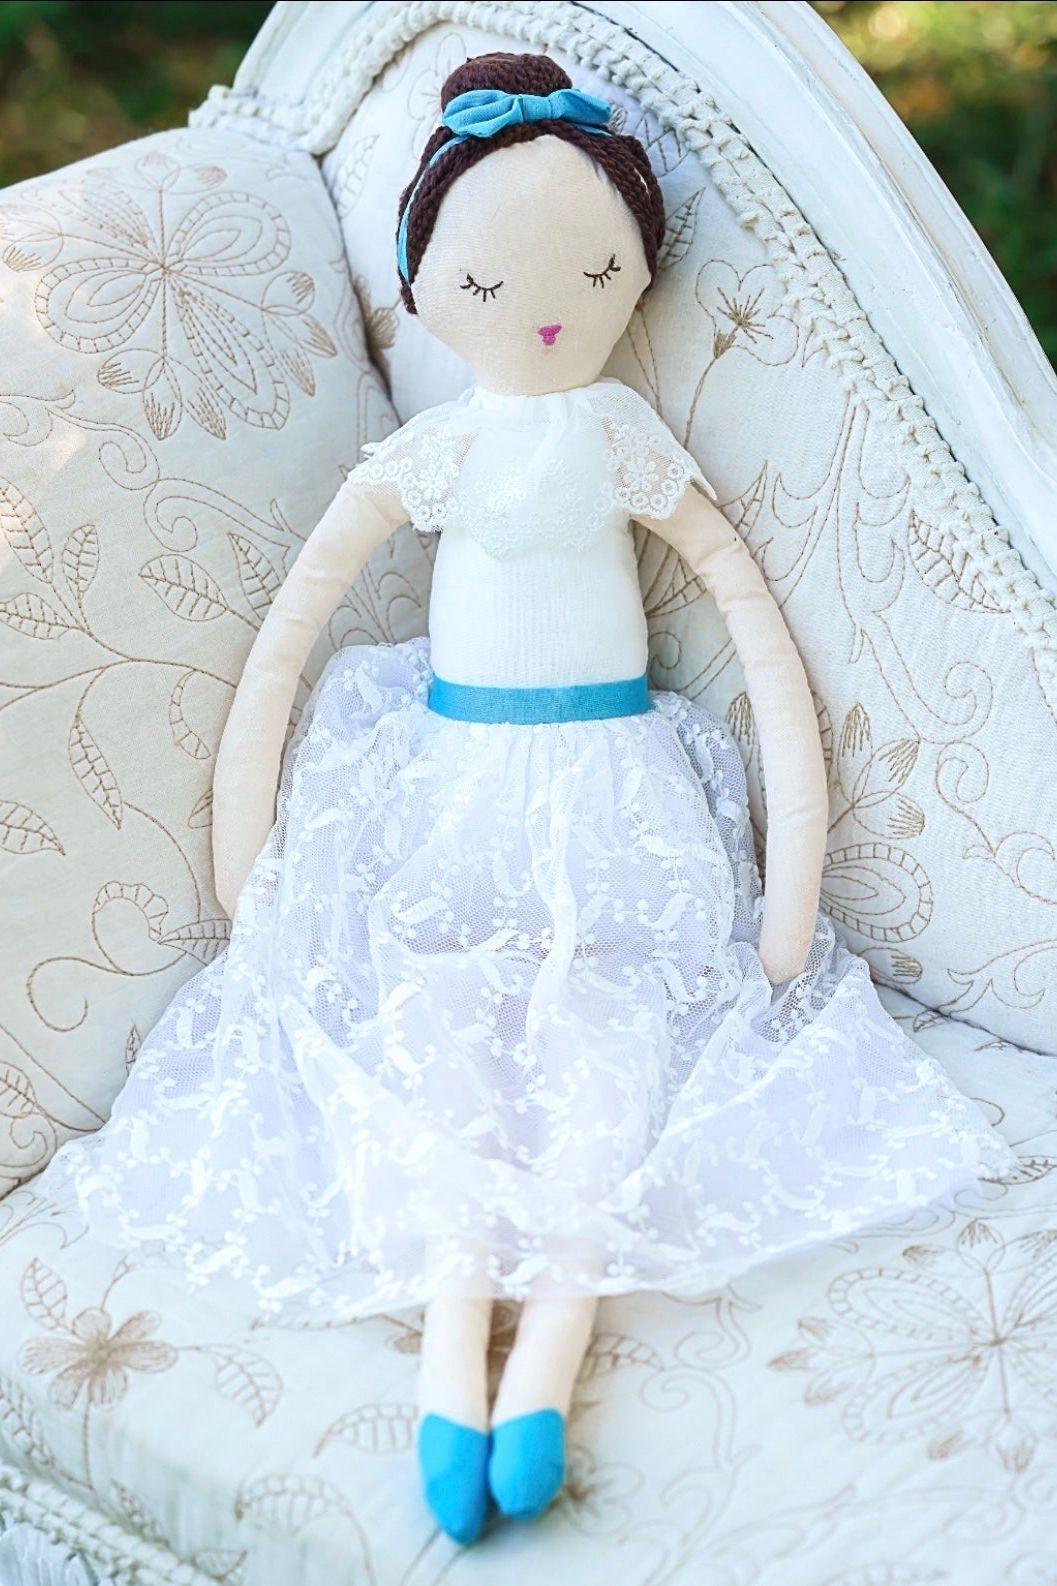 Meet the Clara Doll, the Star of the Show from The Nutcracker Ballet